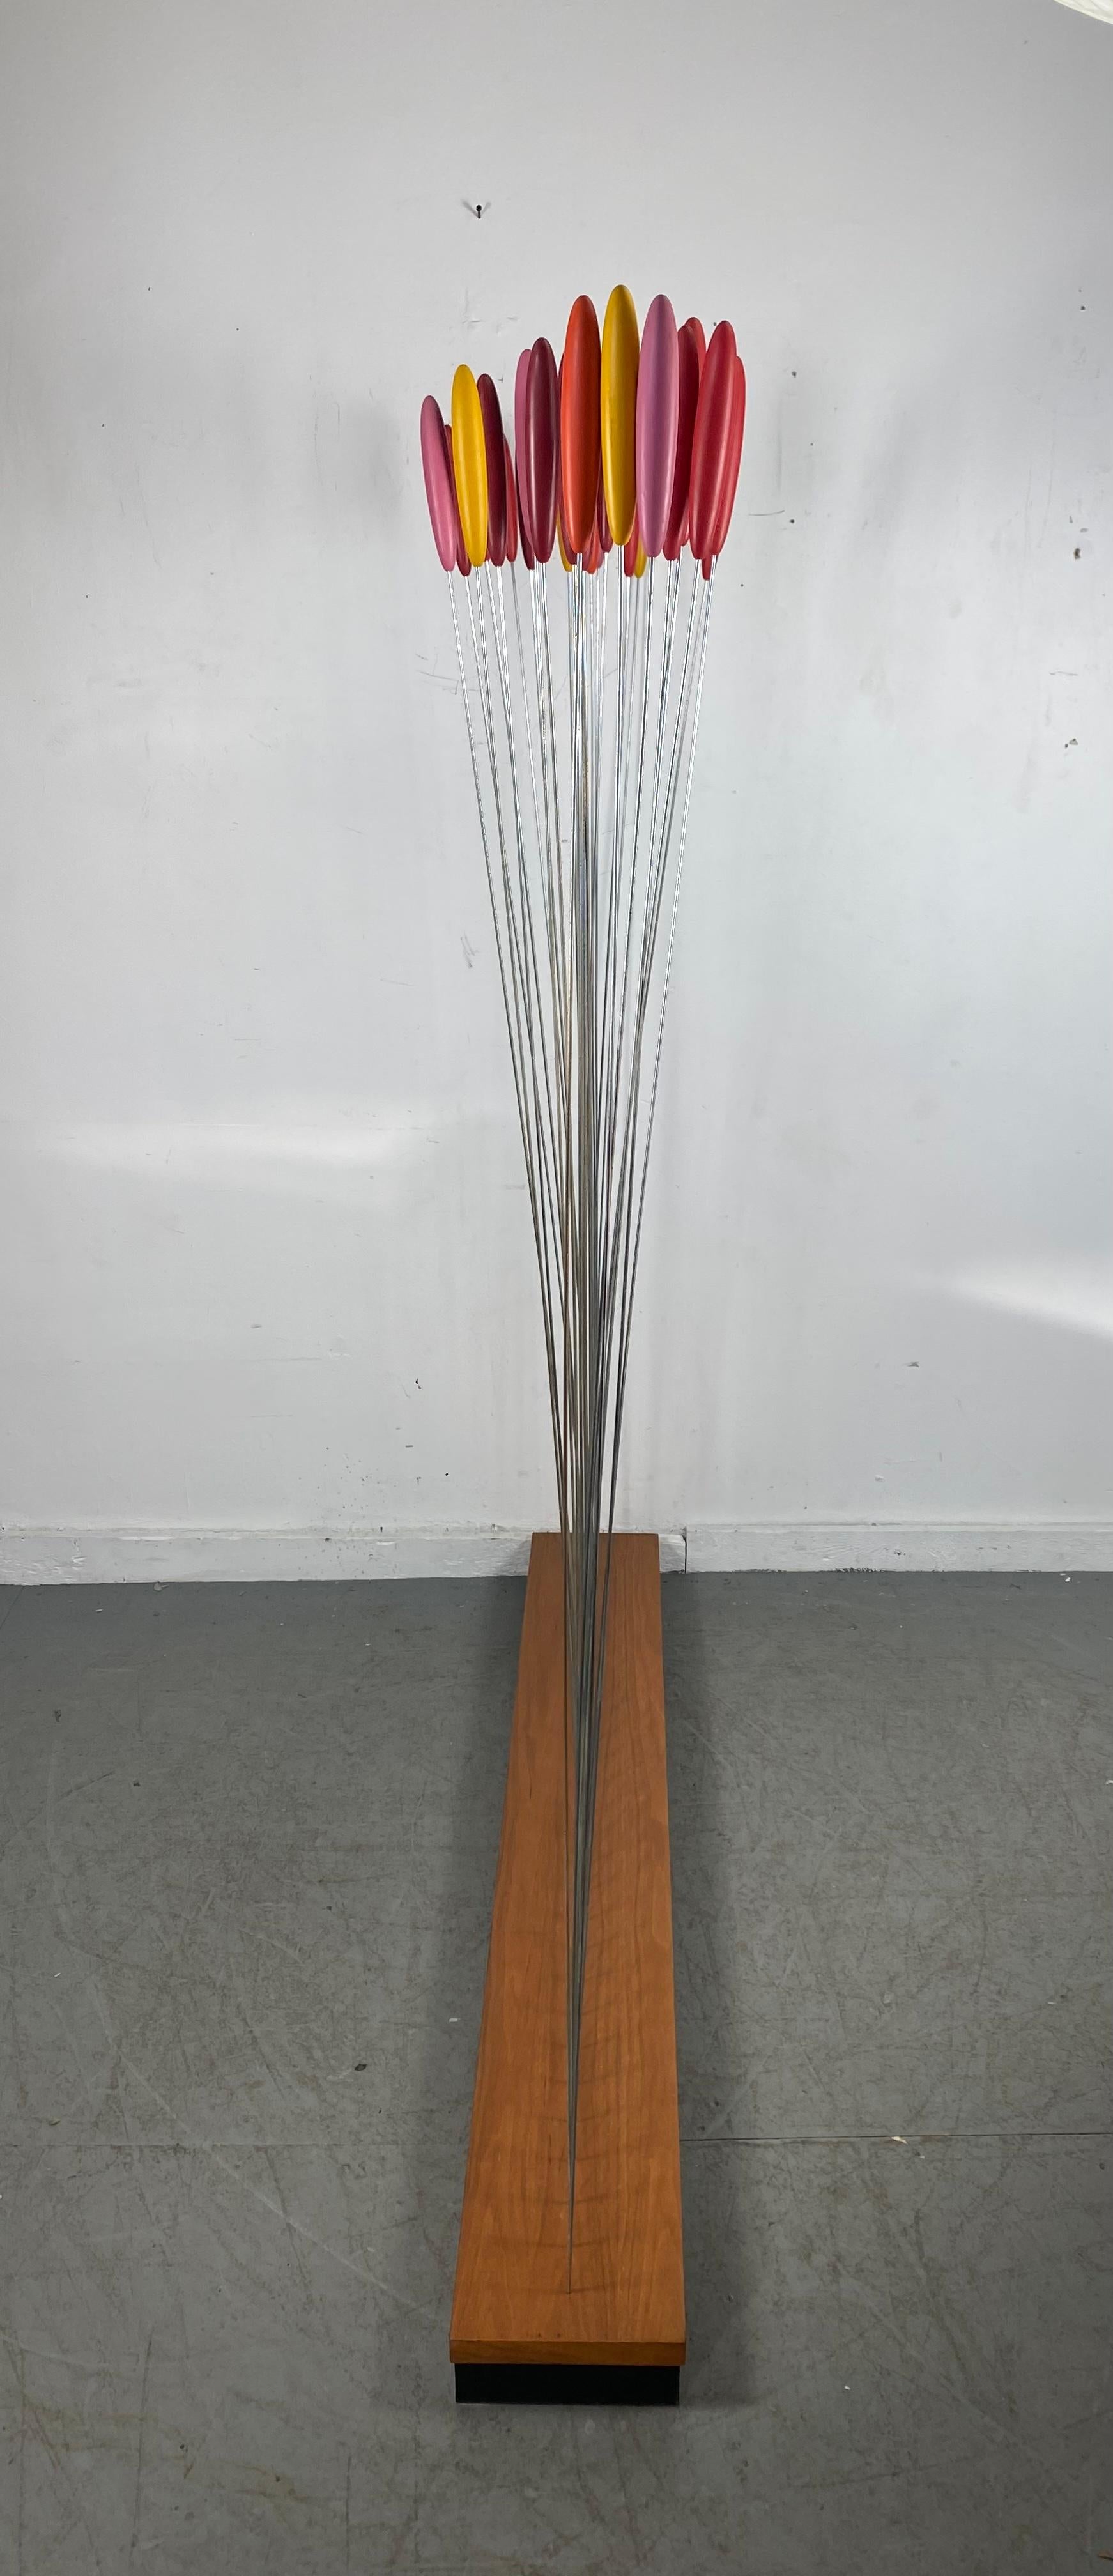 Late 20th Century Rare Bill Curry Cattail Room Divider / Sculpture for Design Line 29 Cattails   For Sale